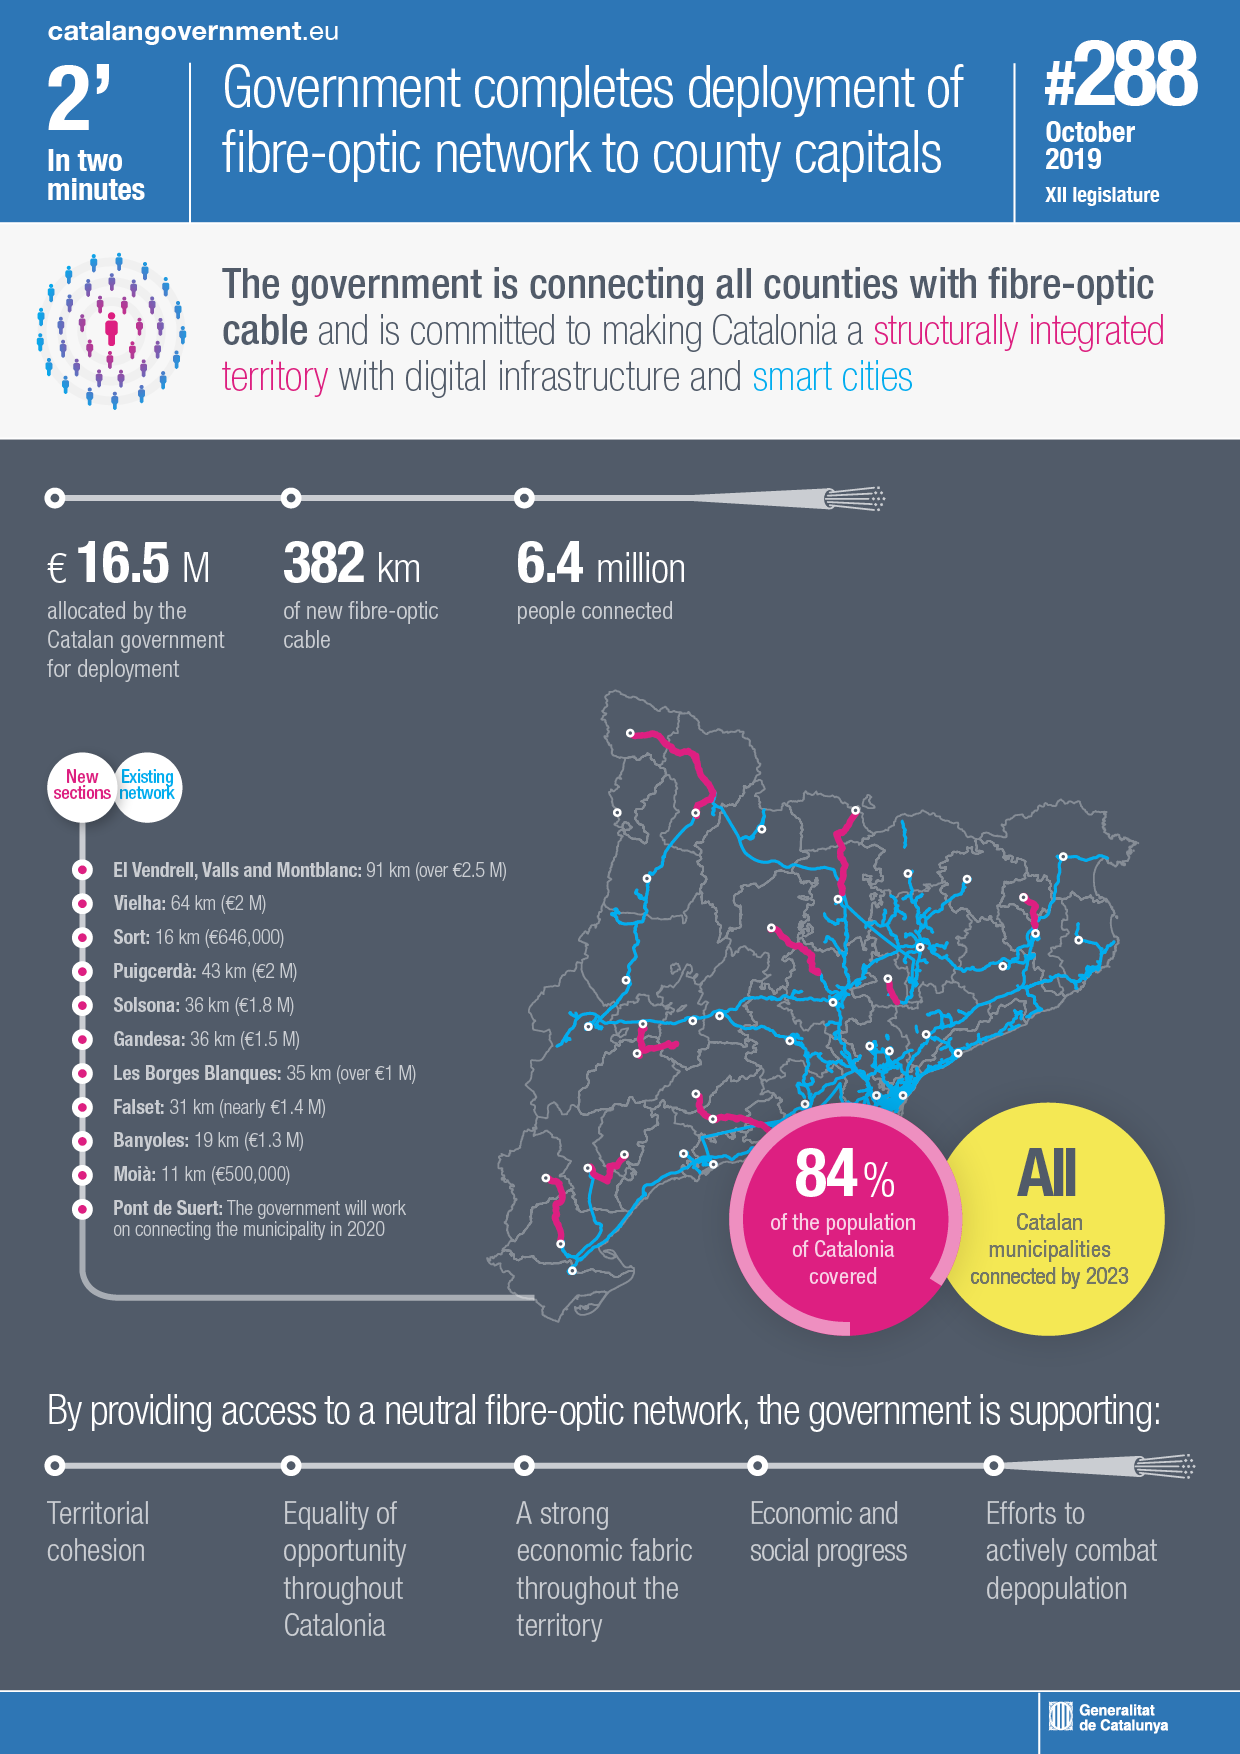 The government is connecting all counties with fibre-optic cable and is committed to making Catalonia a structurally integrated territory with digital infrastructure and smart cities.